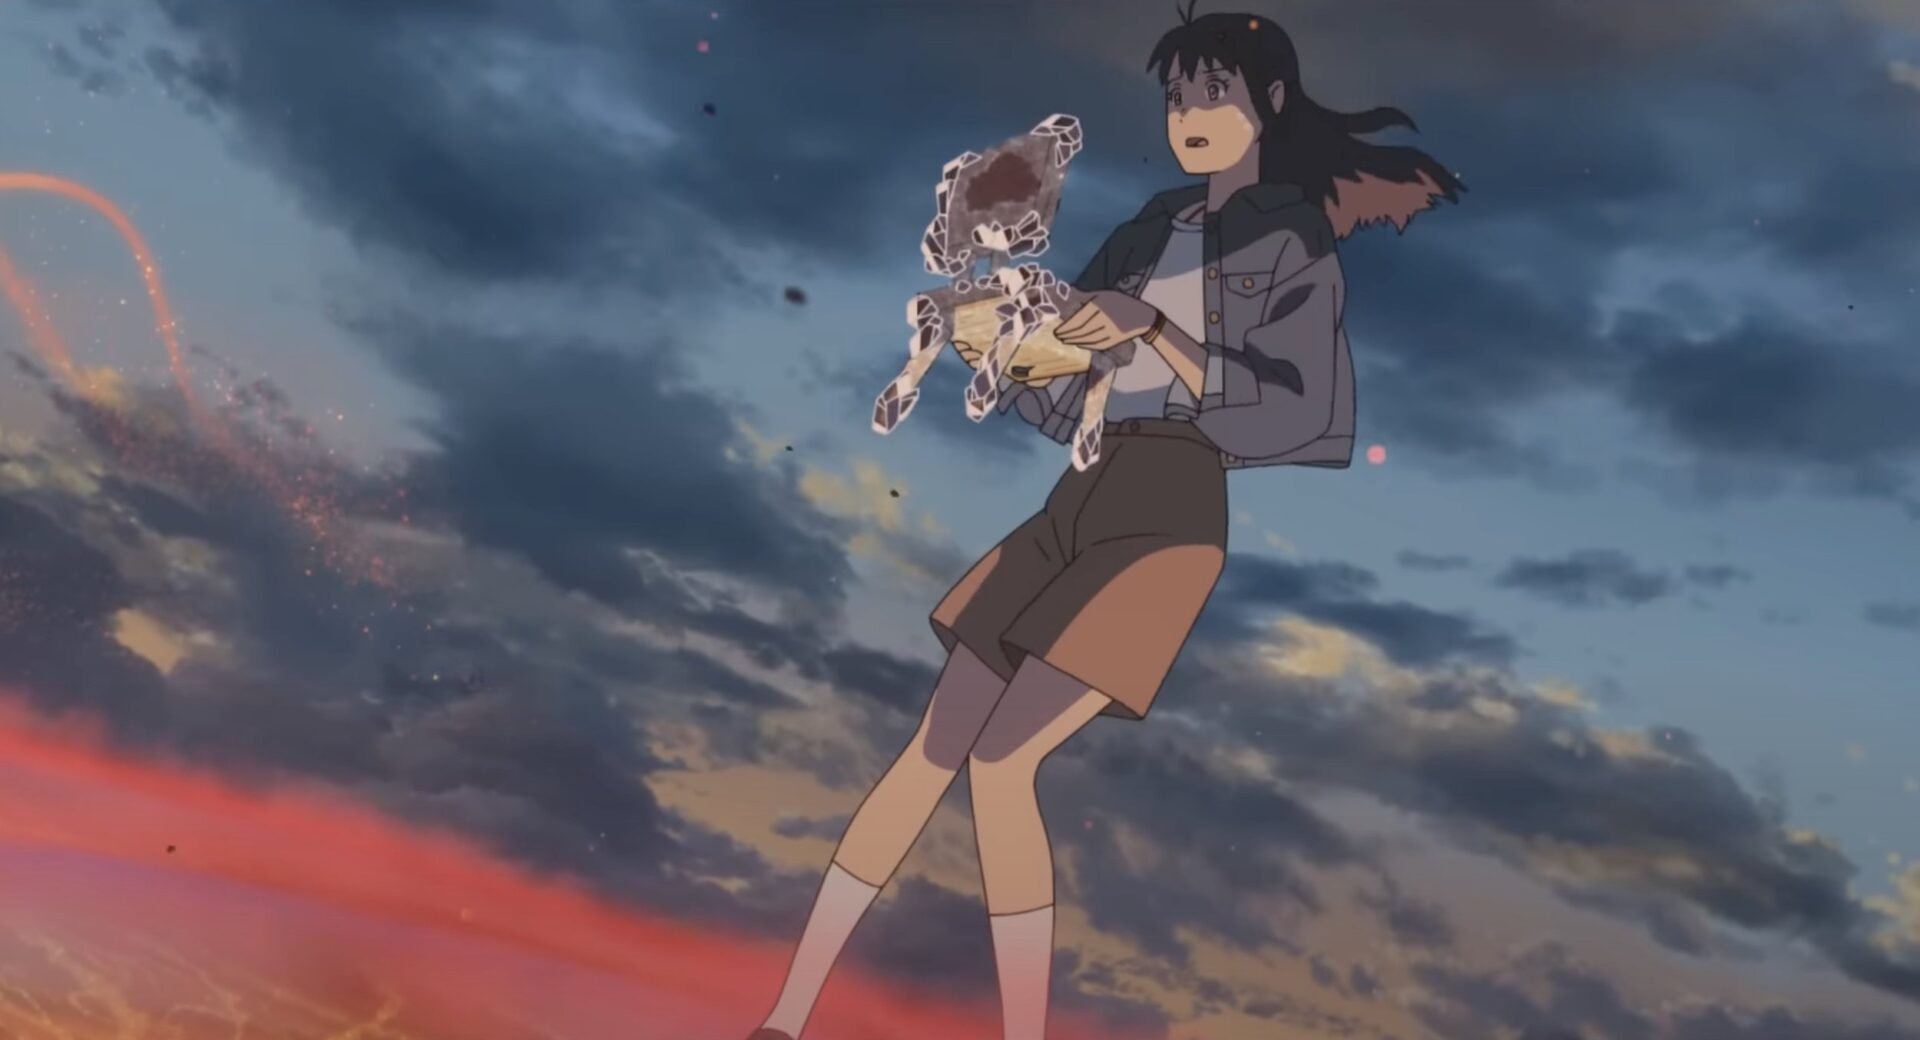 Suzume': Fantastic New Anime With a Heroine in the Studio Ghibli Vein